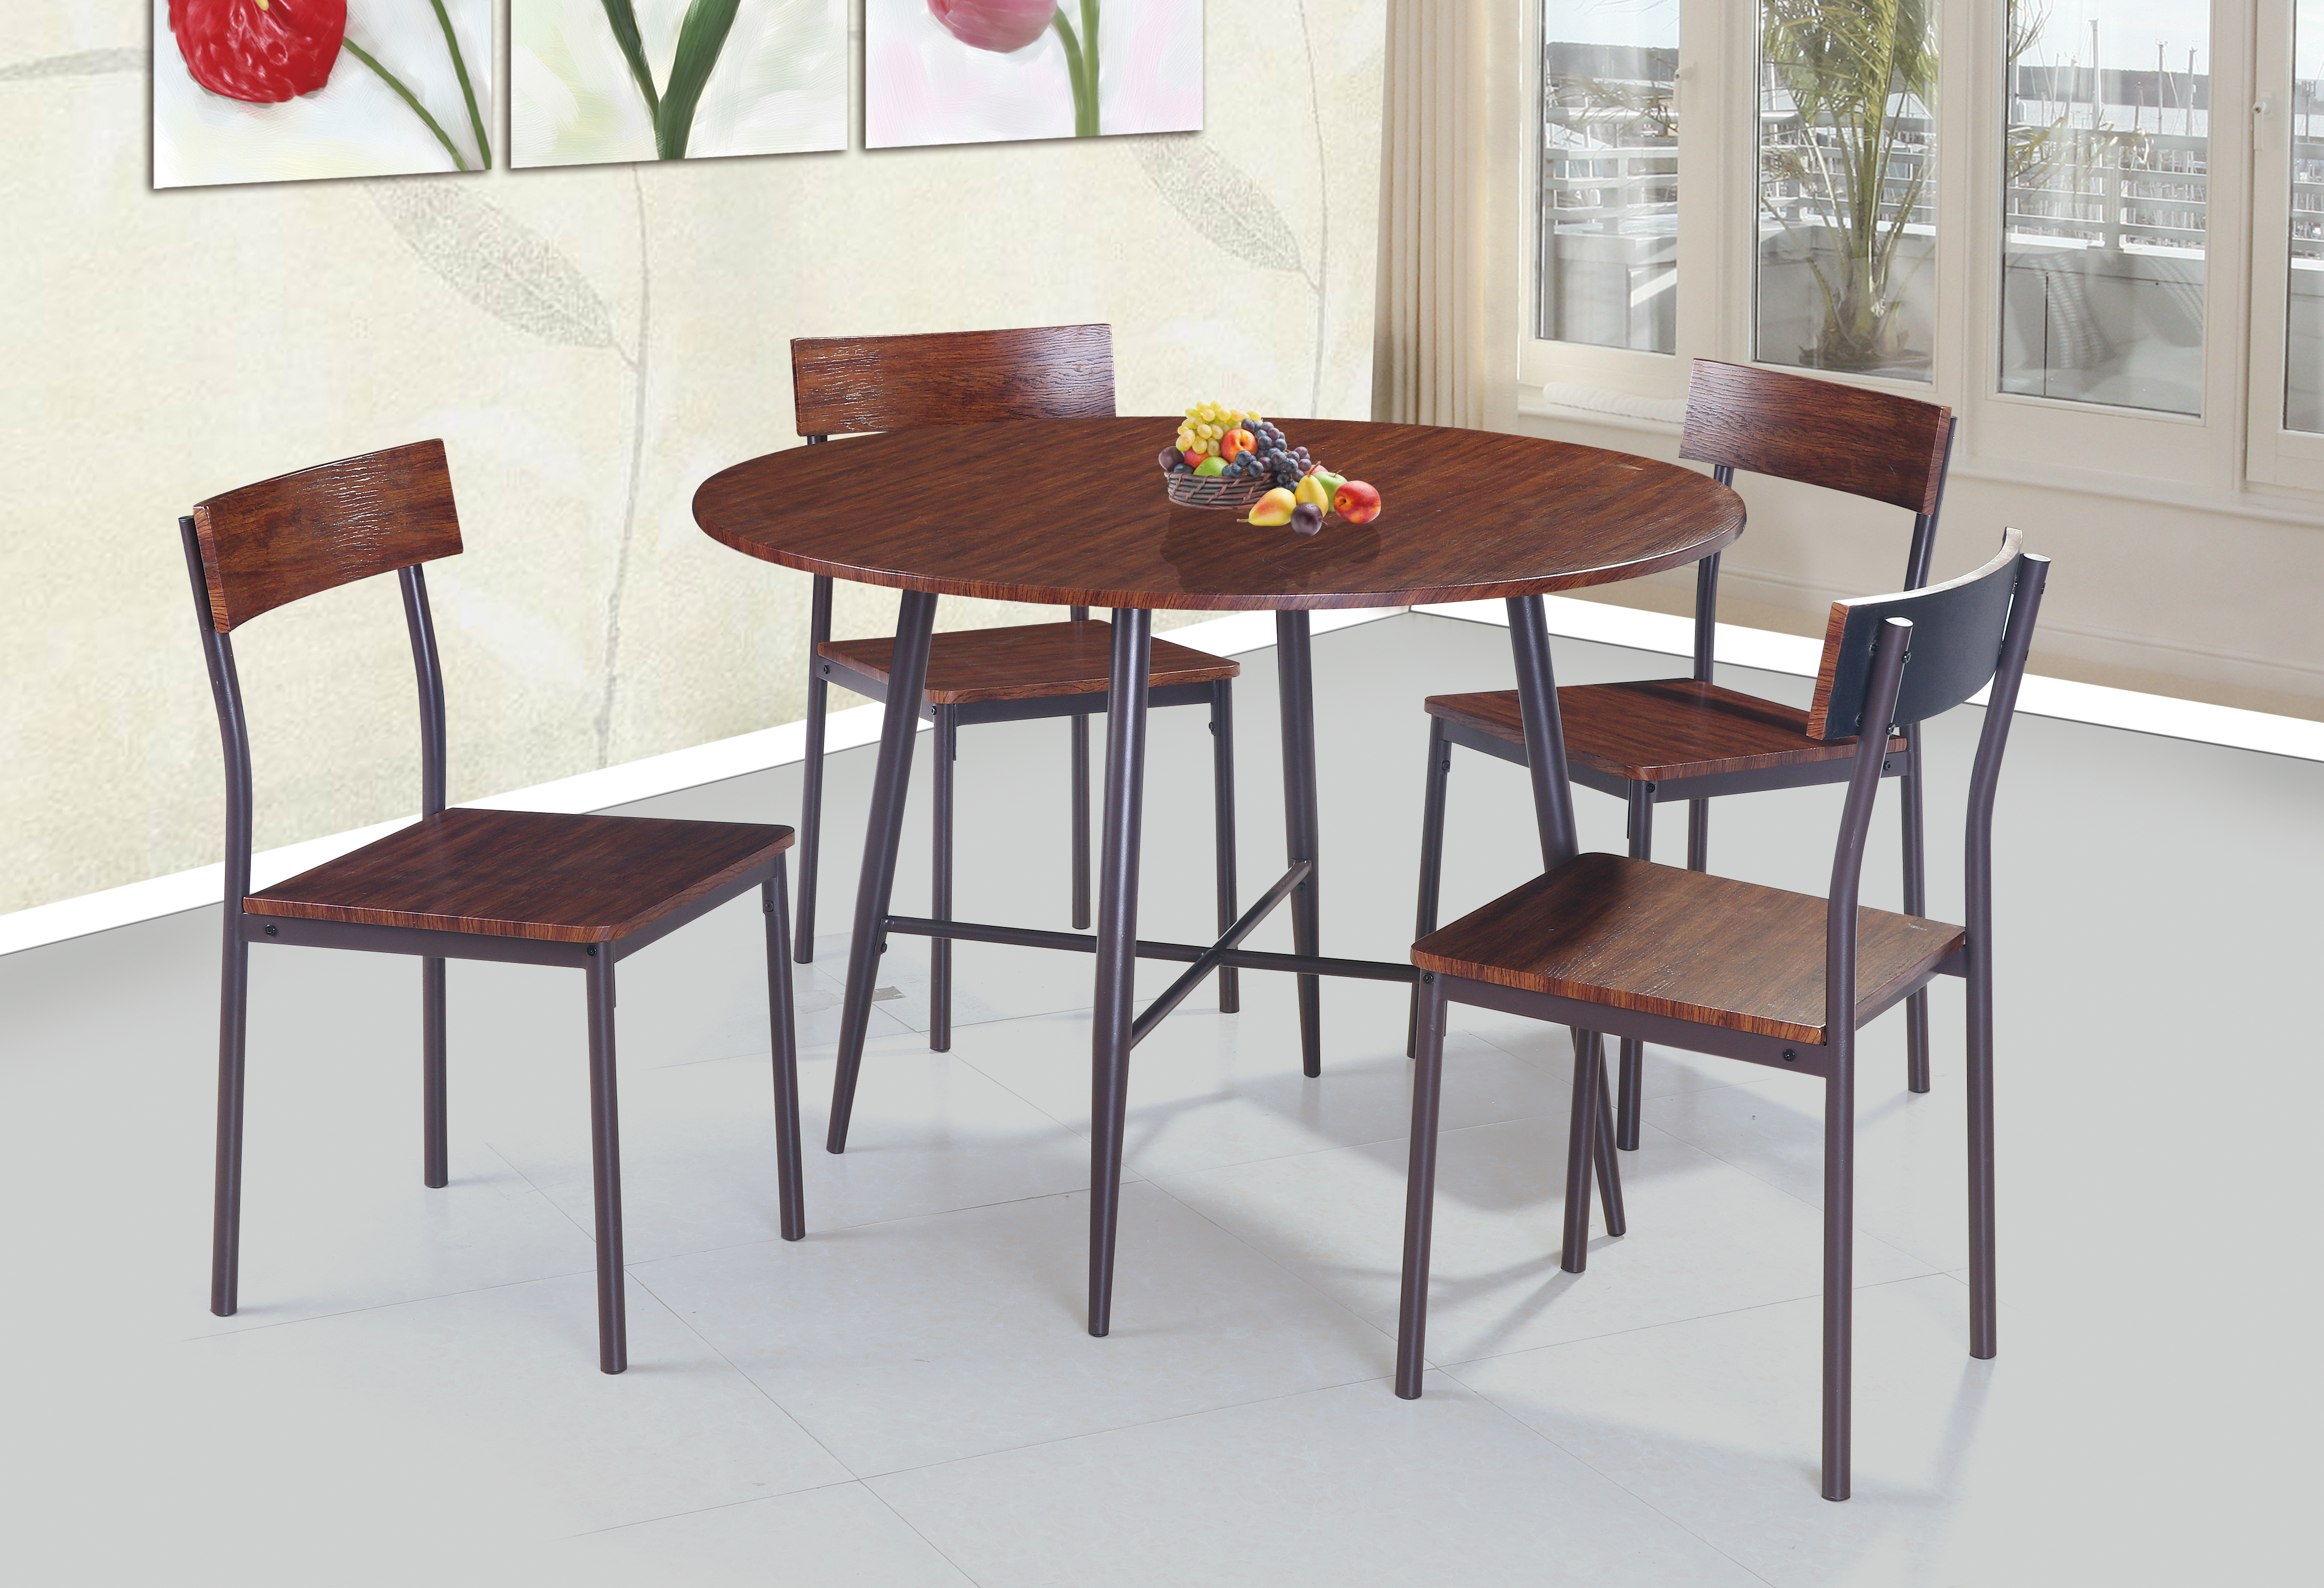 GS-5137 5pc dining set Featured Image